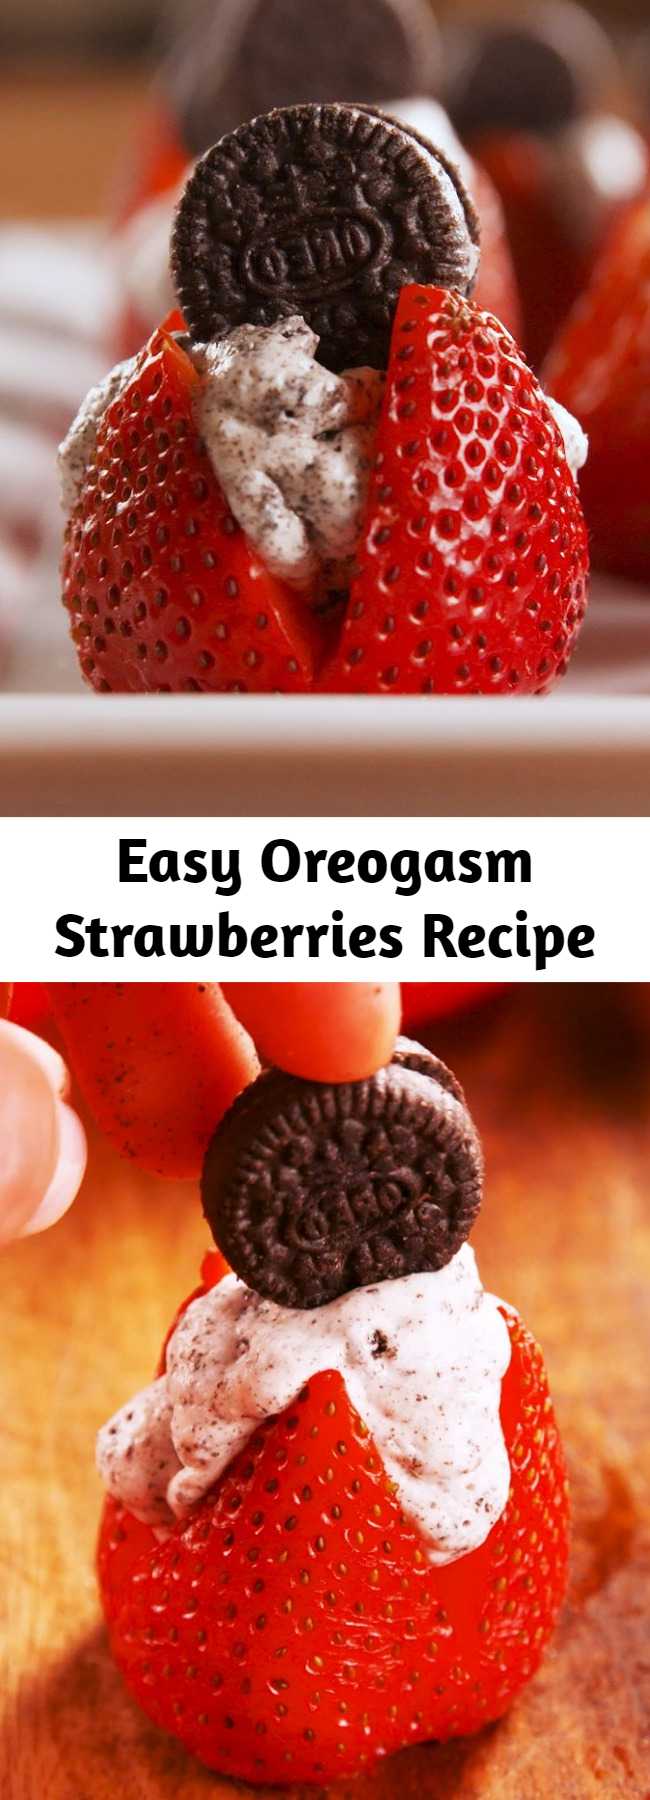 Easy Oreogasm Strawberries Recipe - Quick and easy and delectable. Stuffed with cookies n' cream filling, these treats give chocolate covered strawberries a run for their money.